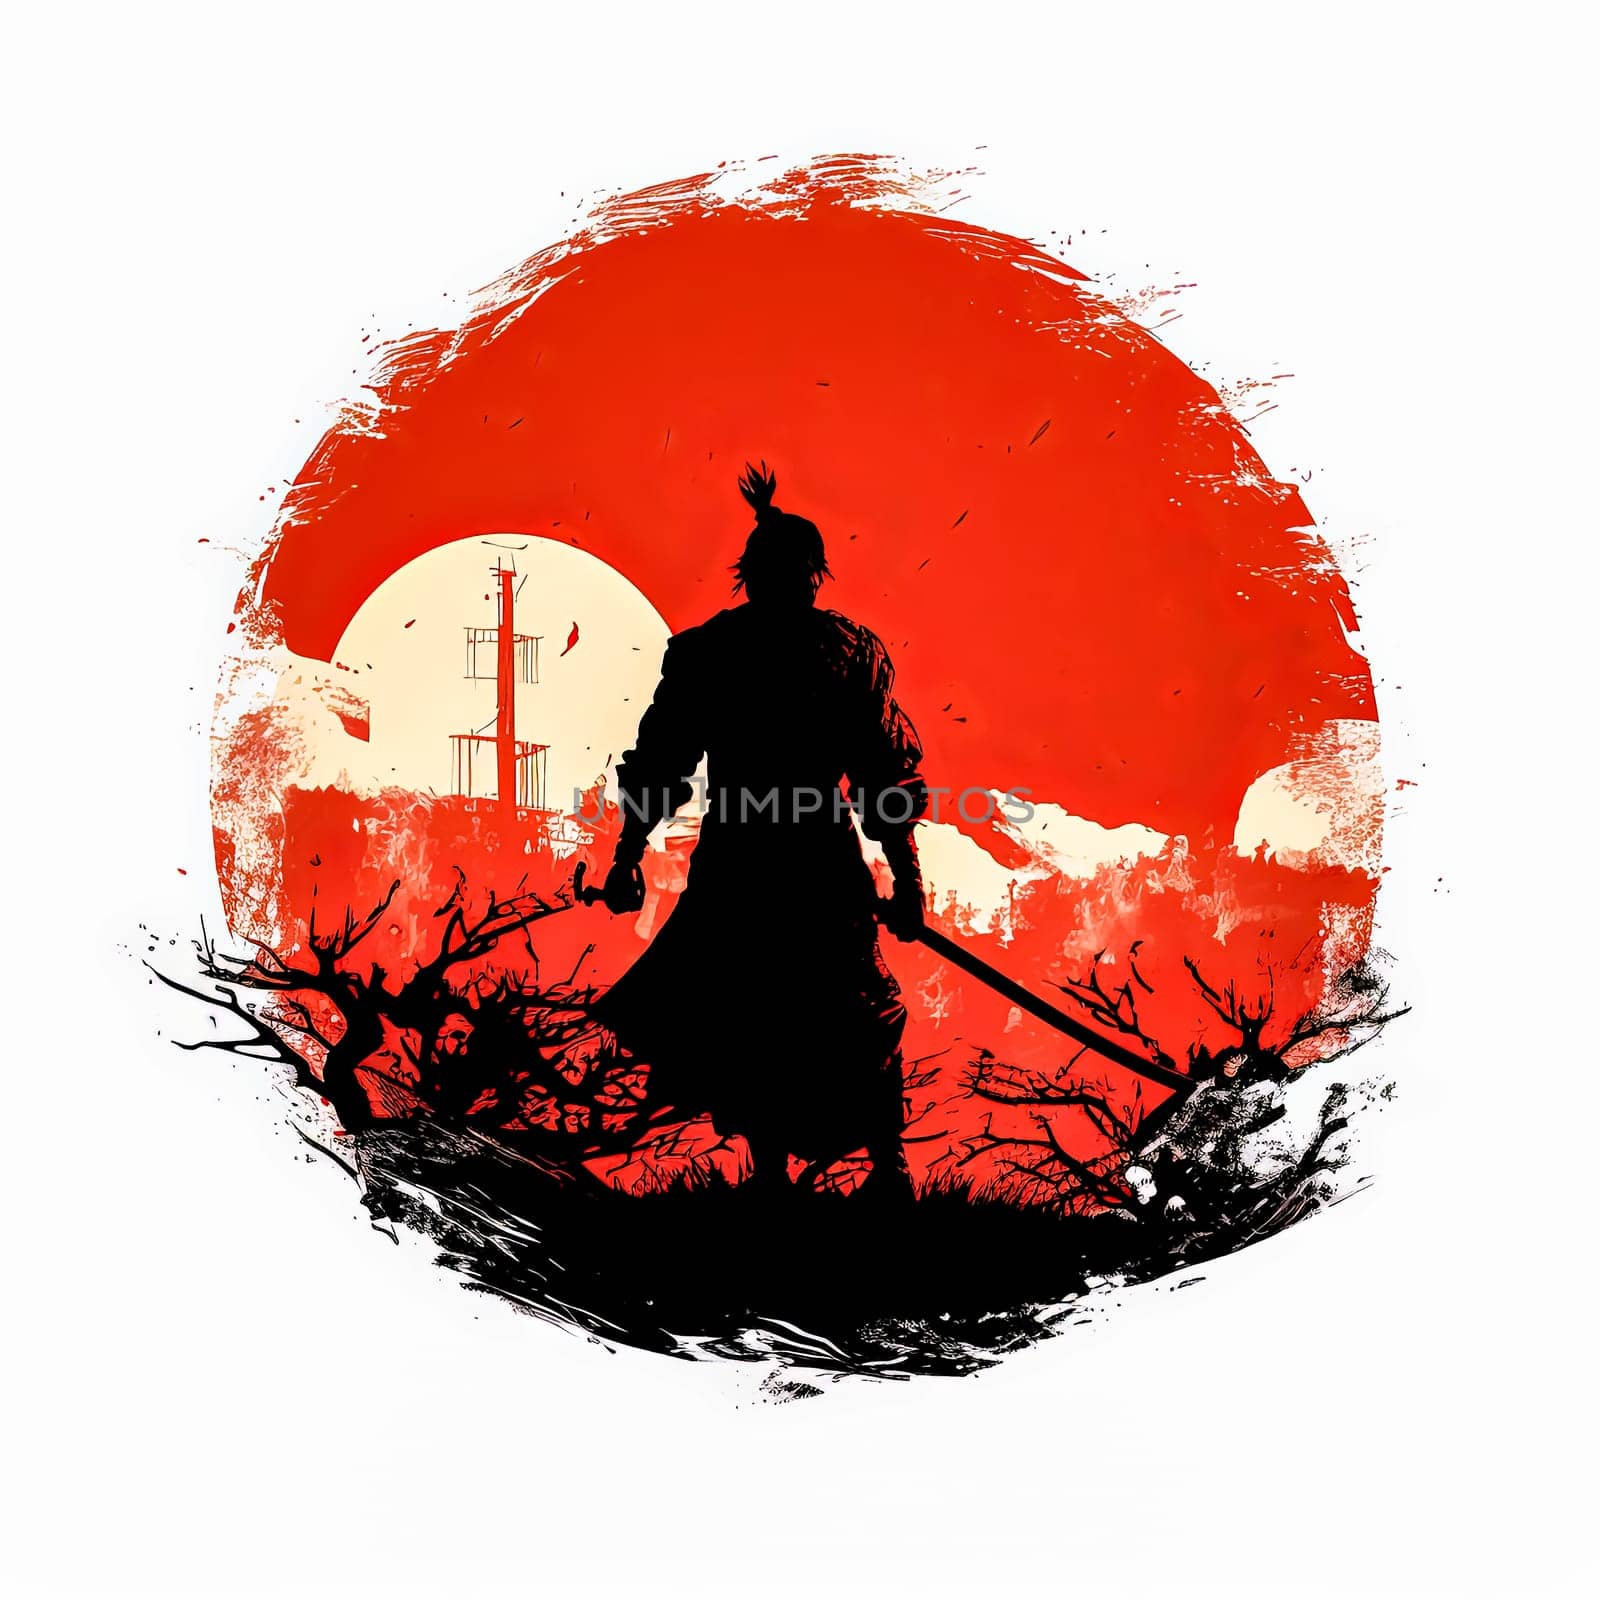 A man stands in front of a red moon. The man is holding a sword and he is a warrior. The image has a dark and mysterious mood, with the red moon and the man's silhouette creating a sense of danger